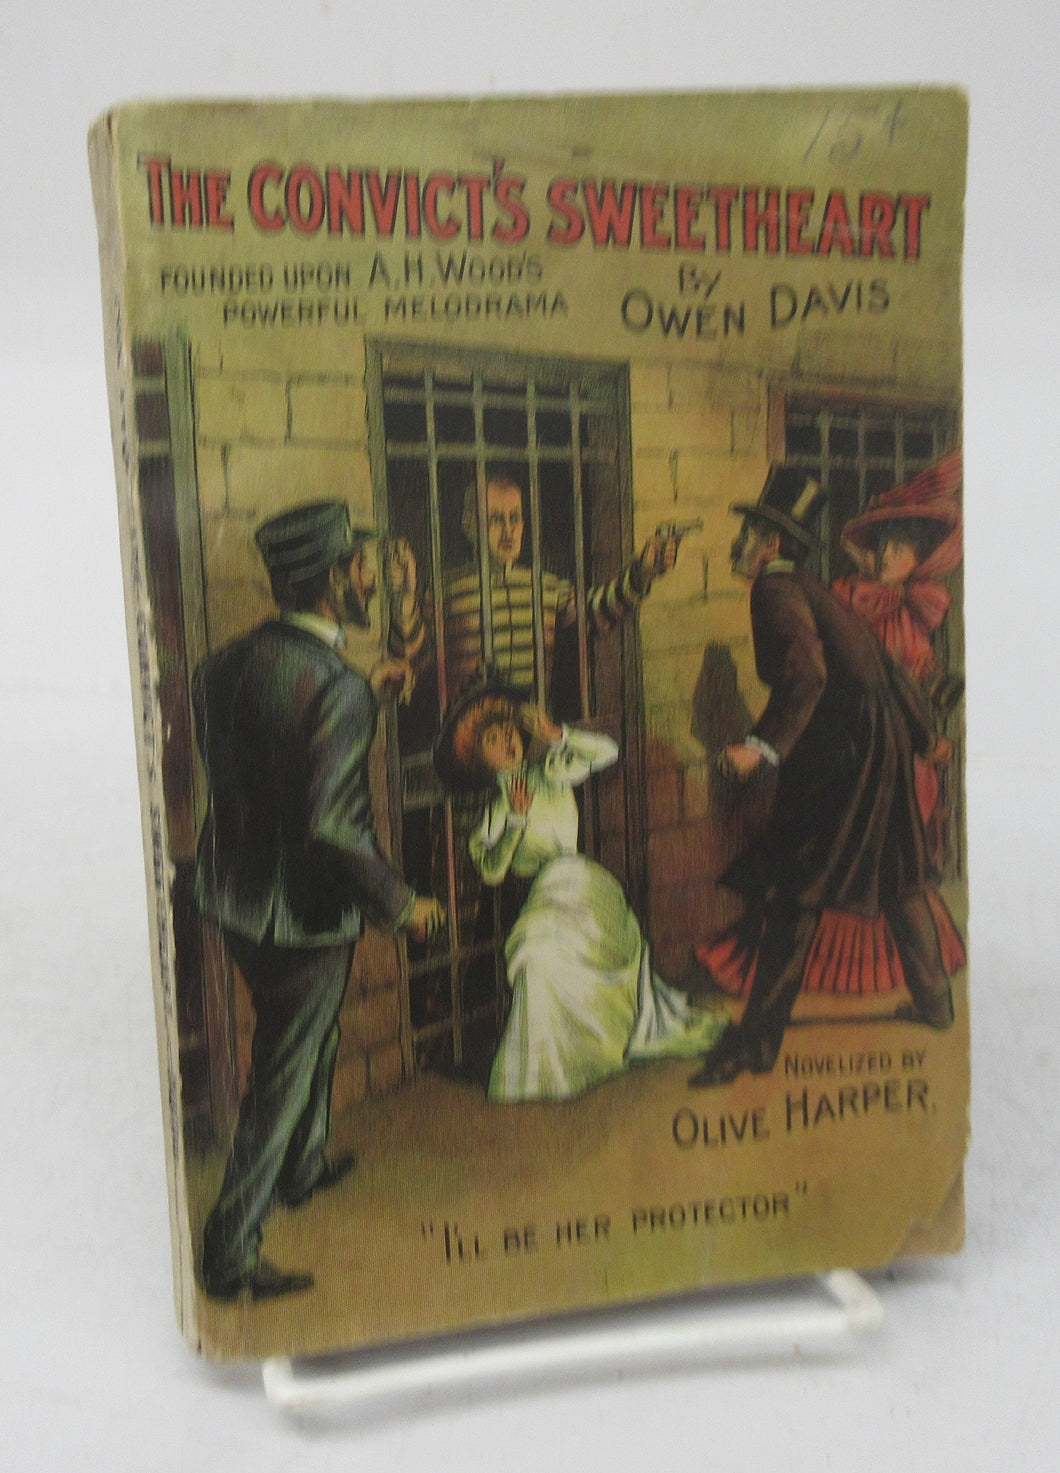 The Convict's Sweetheart. Founded Upon A. H. Woods' Powerful Drama of Life in Colorado, by Owen Davis. Developed into a Novel by Olive Harper